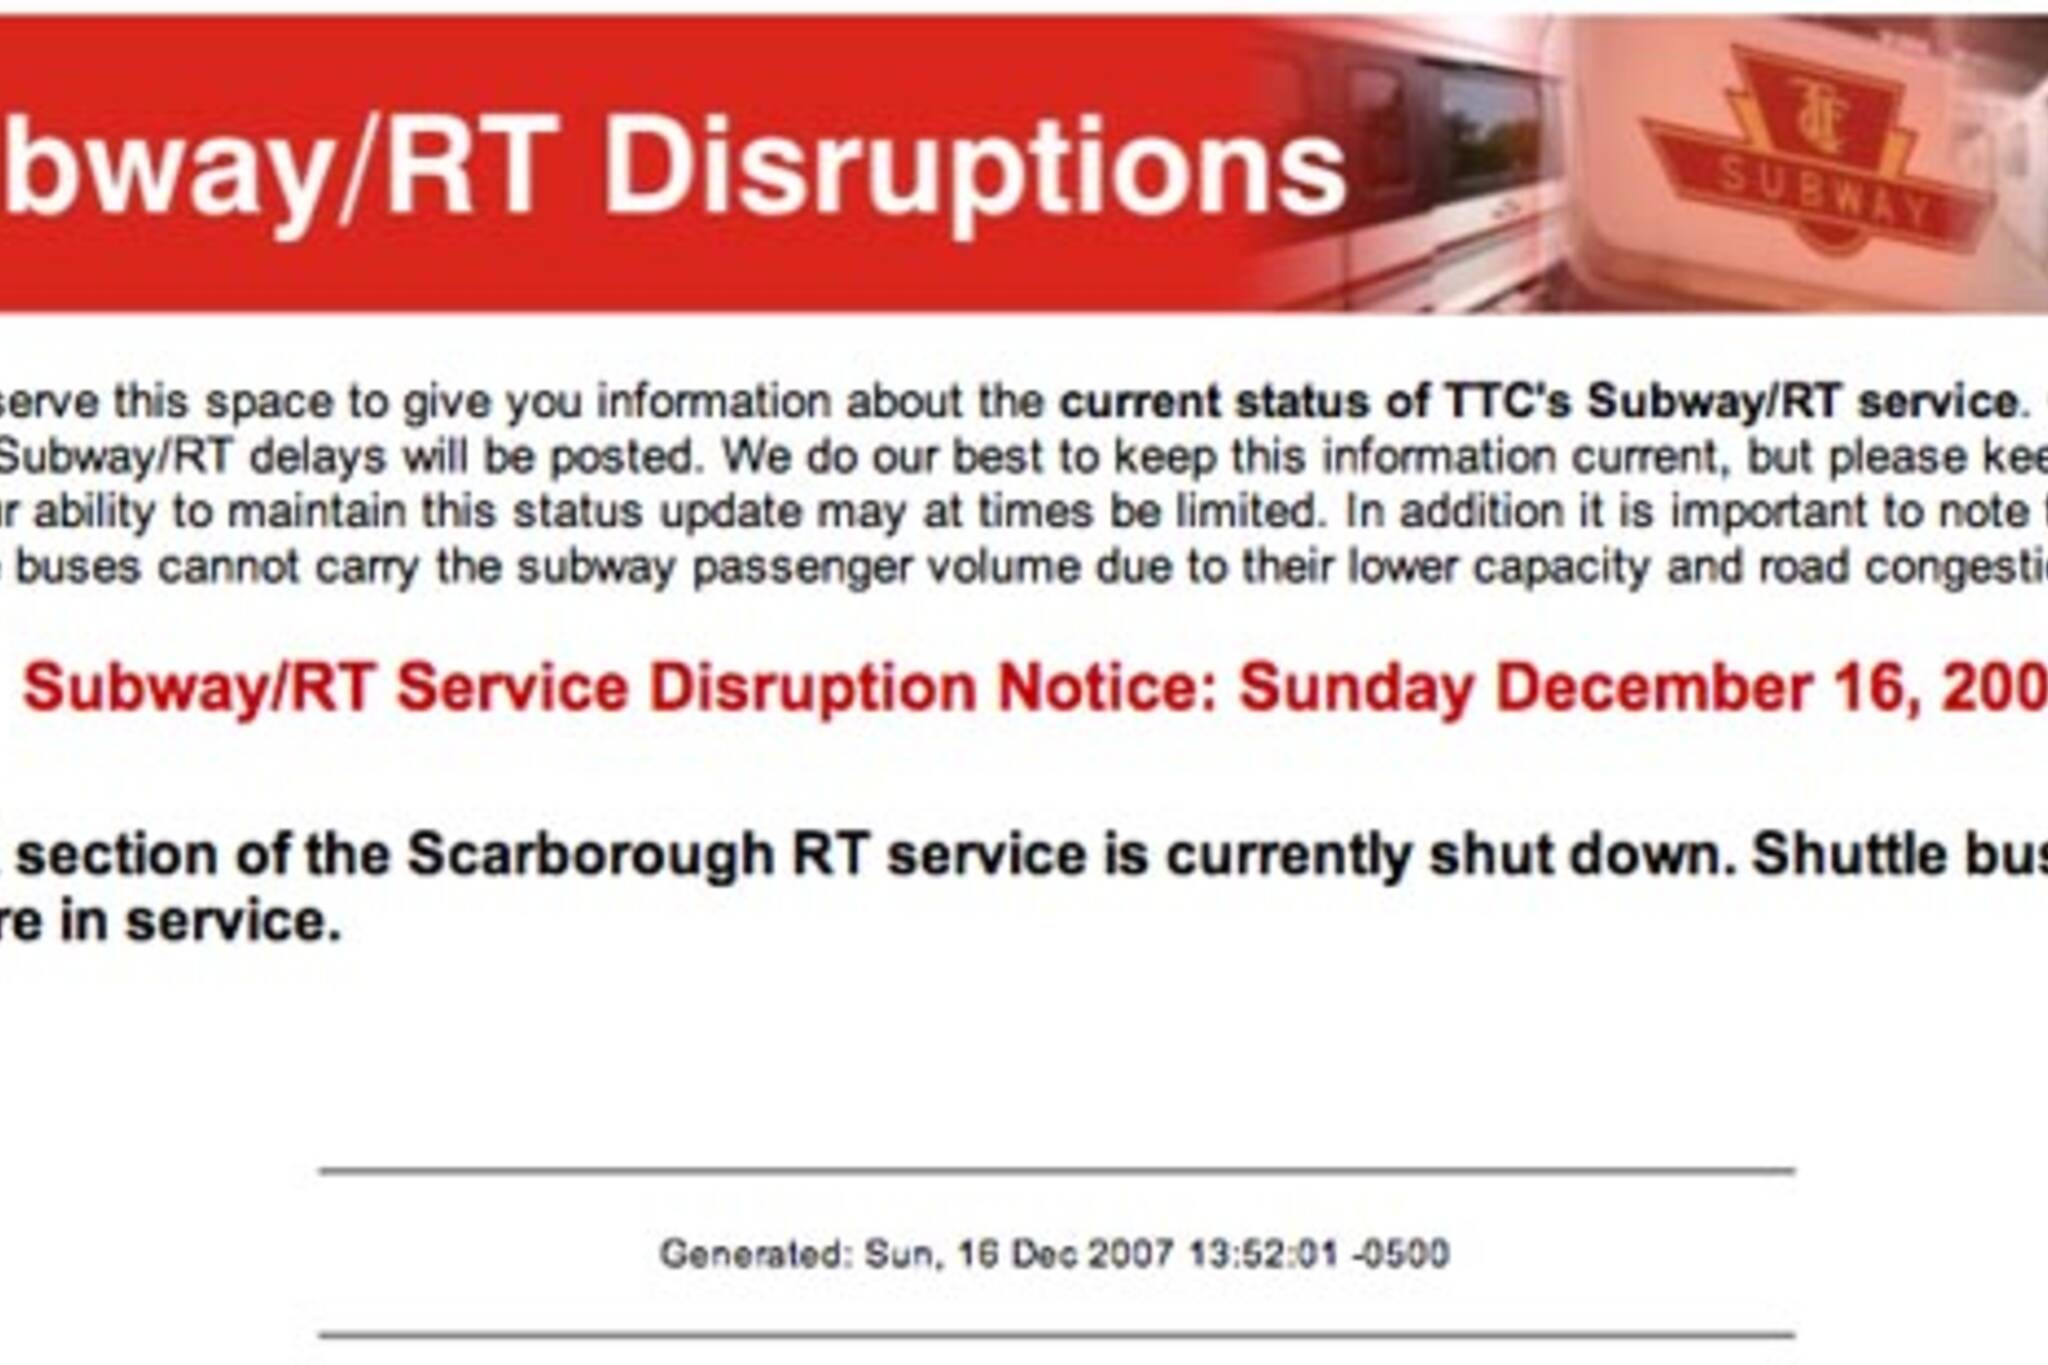 The TTC is not working, but the status page is